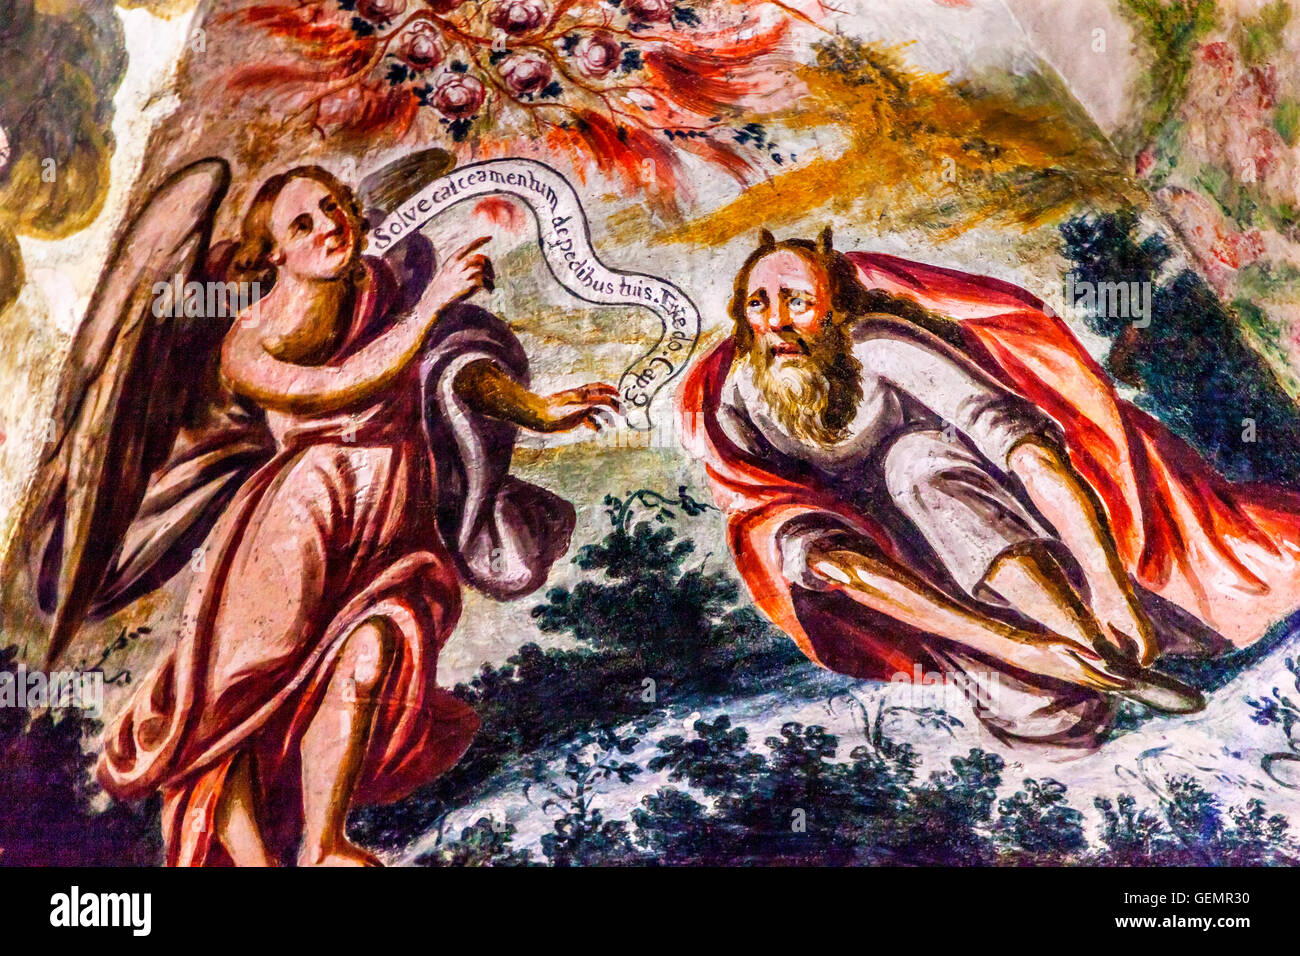 Angel Devil Fresco Sanctuary of Jesus Atotonilco Mexico. Built in the 1700s known as the Sistine Chapel of Mexico with Frescoes Stock Photo